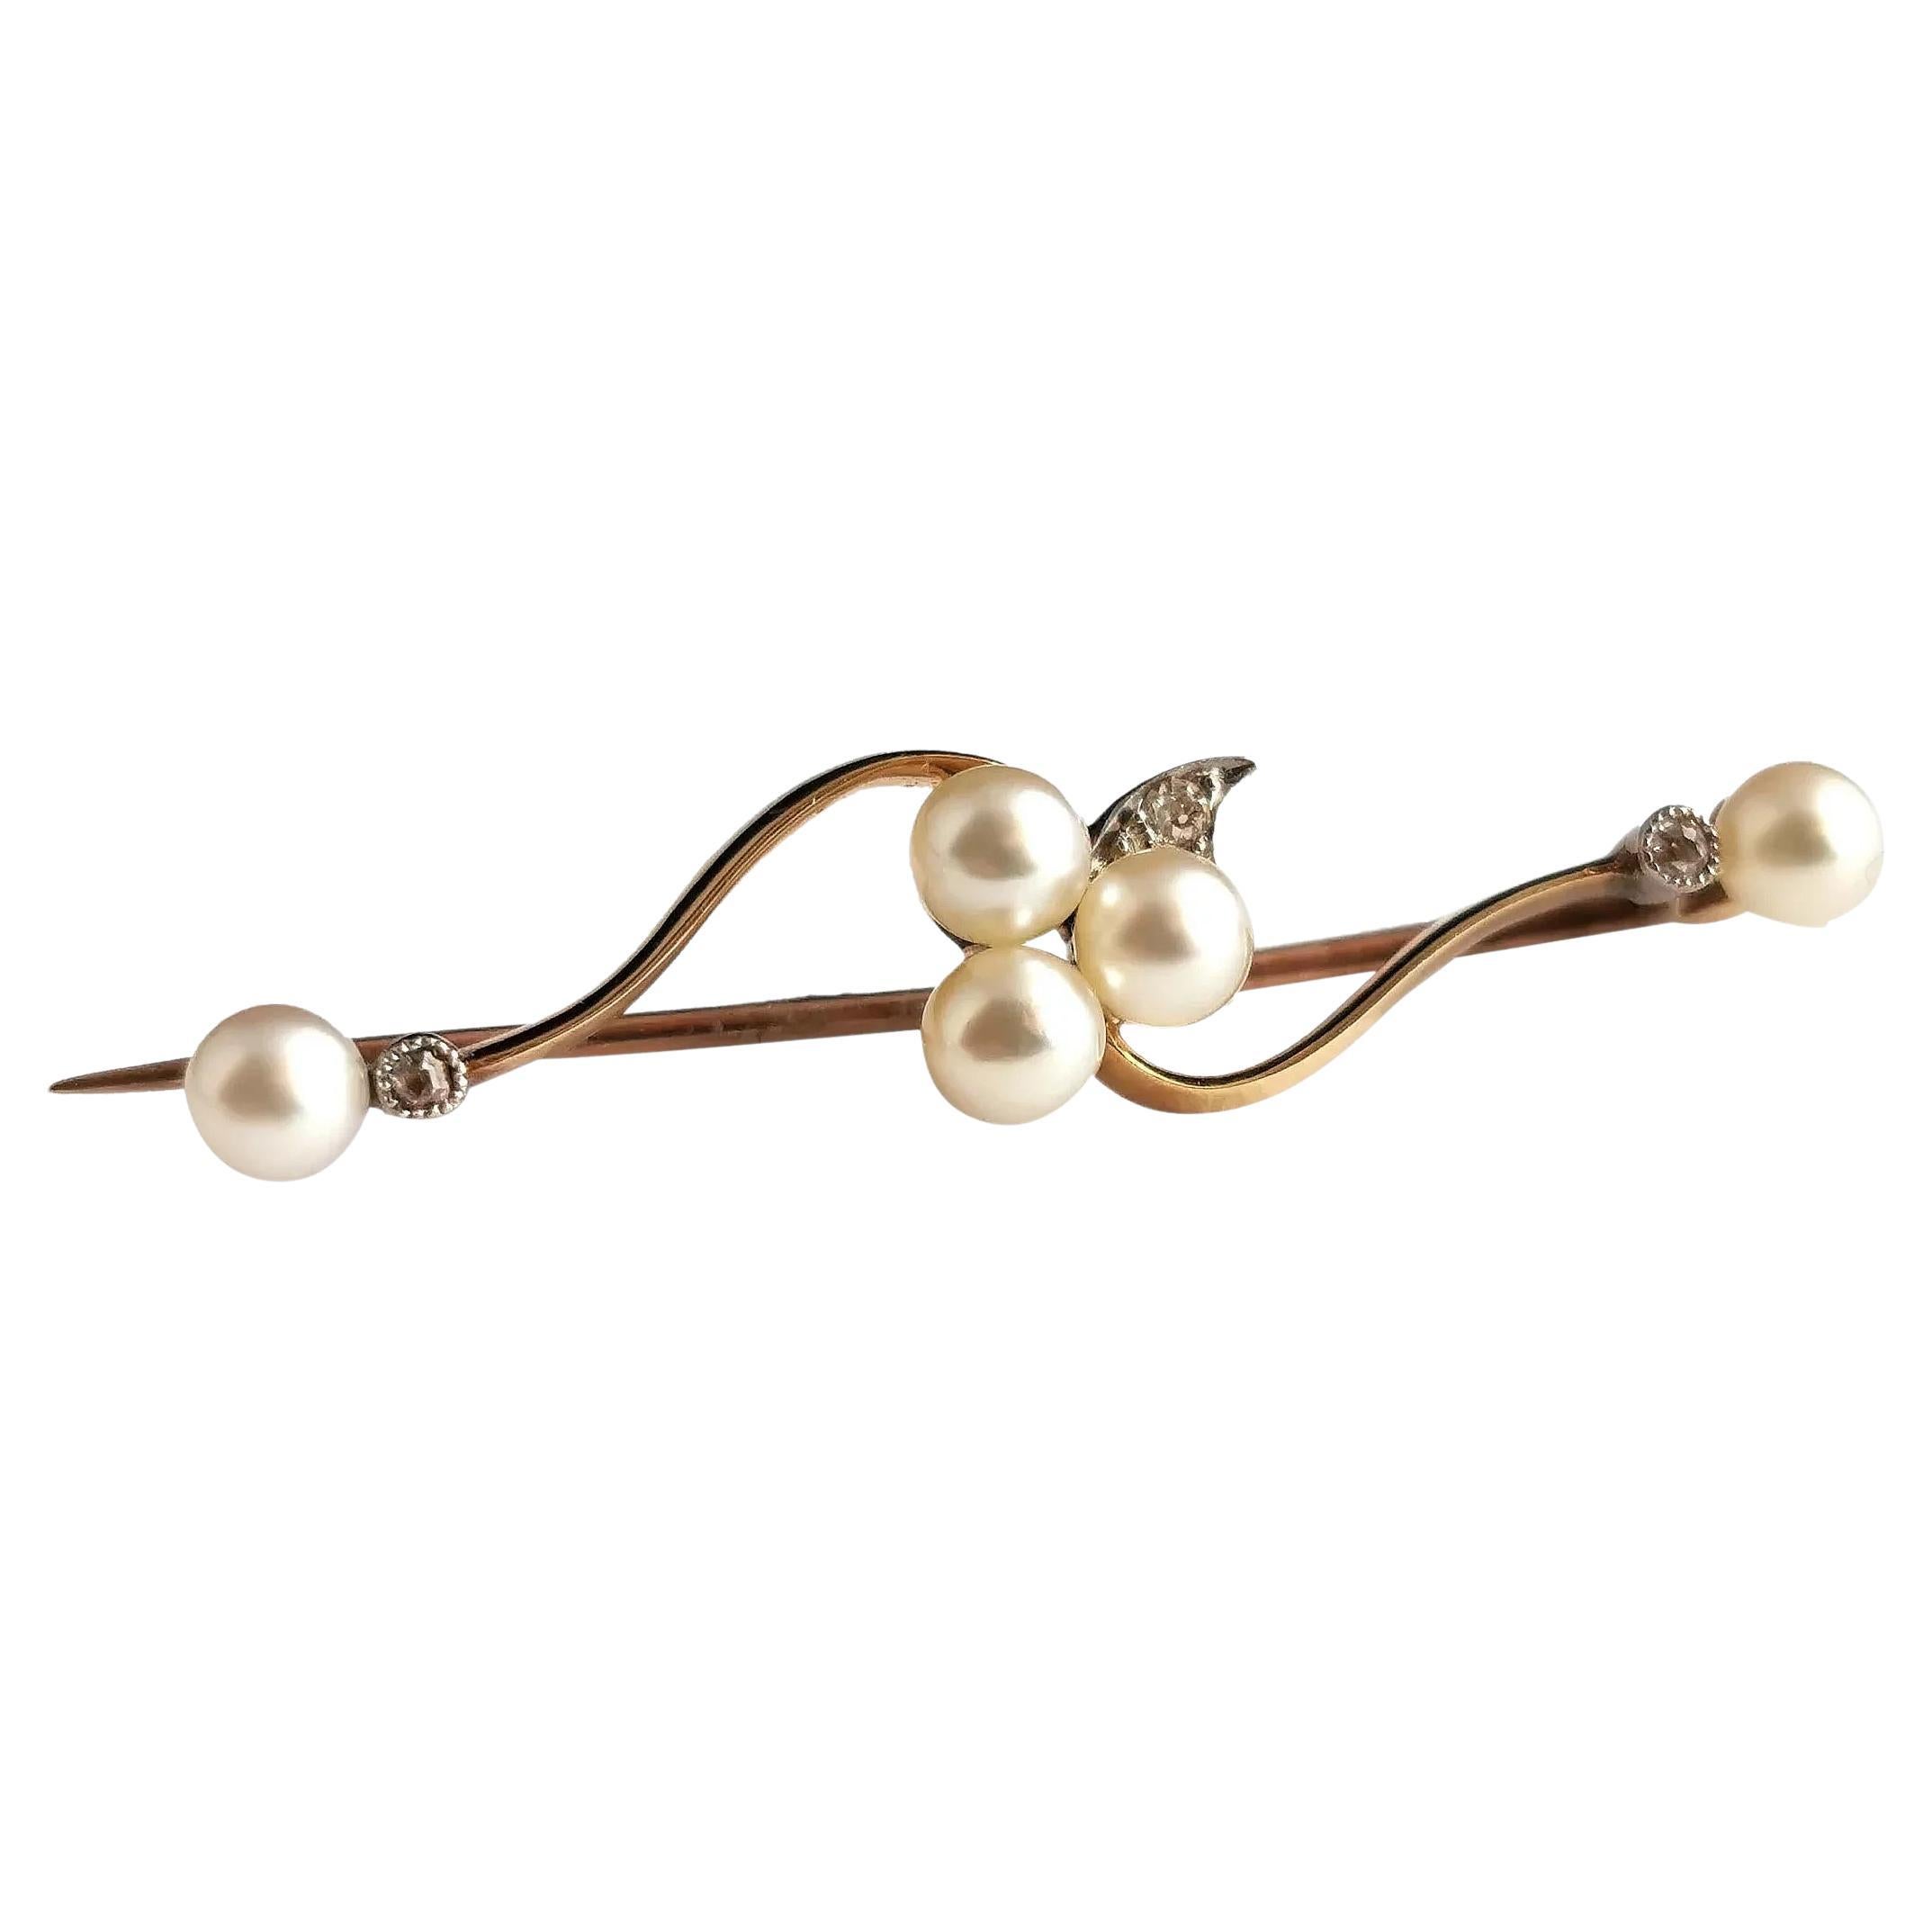 Antique Diamond and Pearl Shamrock Brooch, 9k Gold and Silver